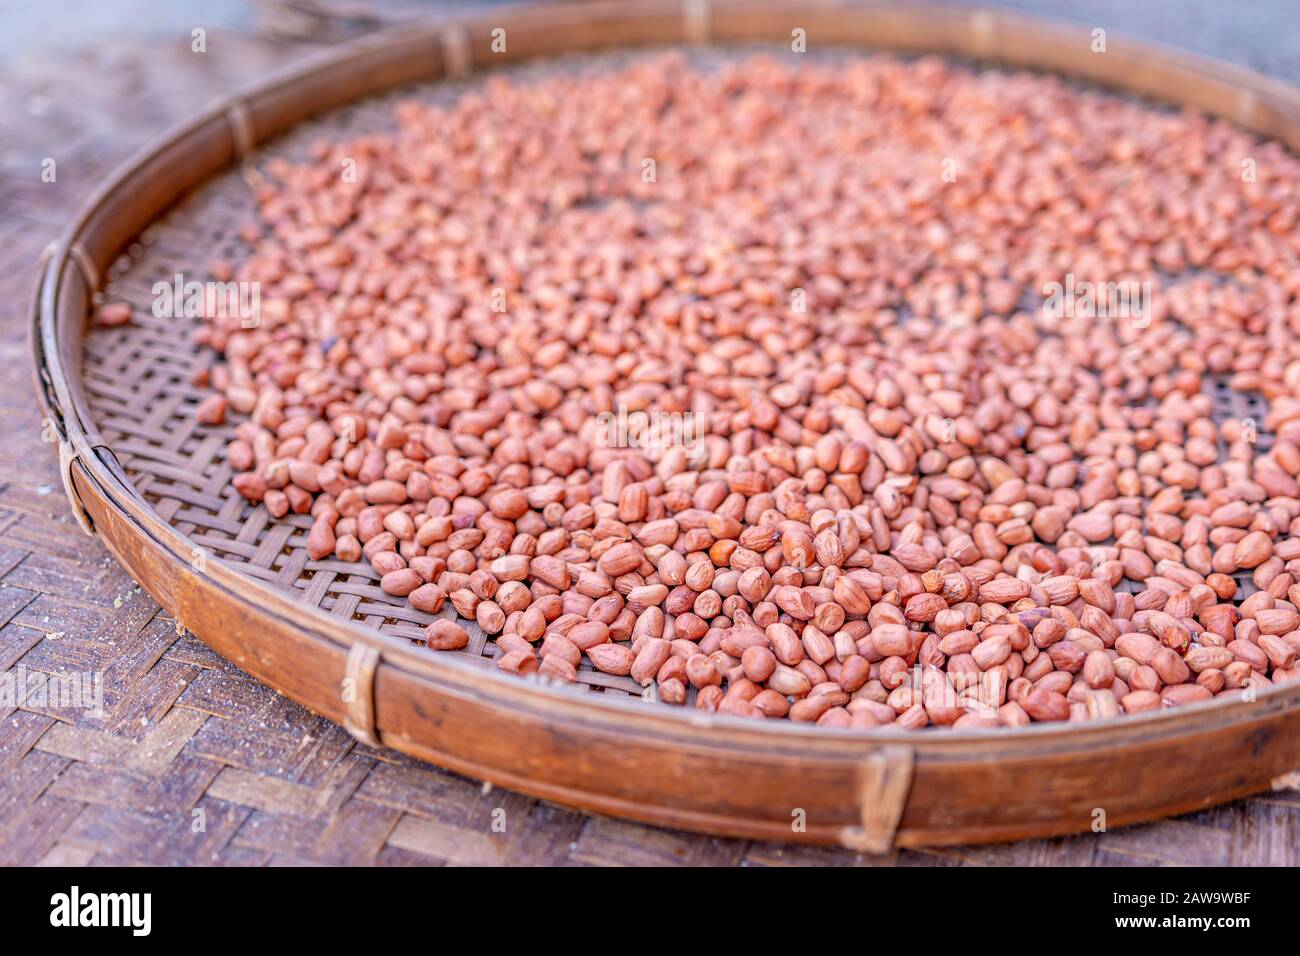 Shelled peanuts in a threshing basket, local market Stock Photo